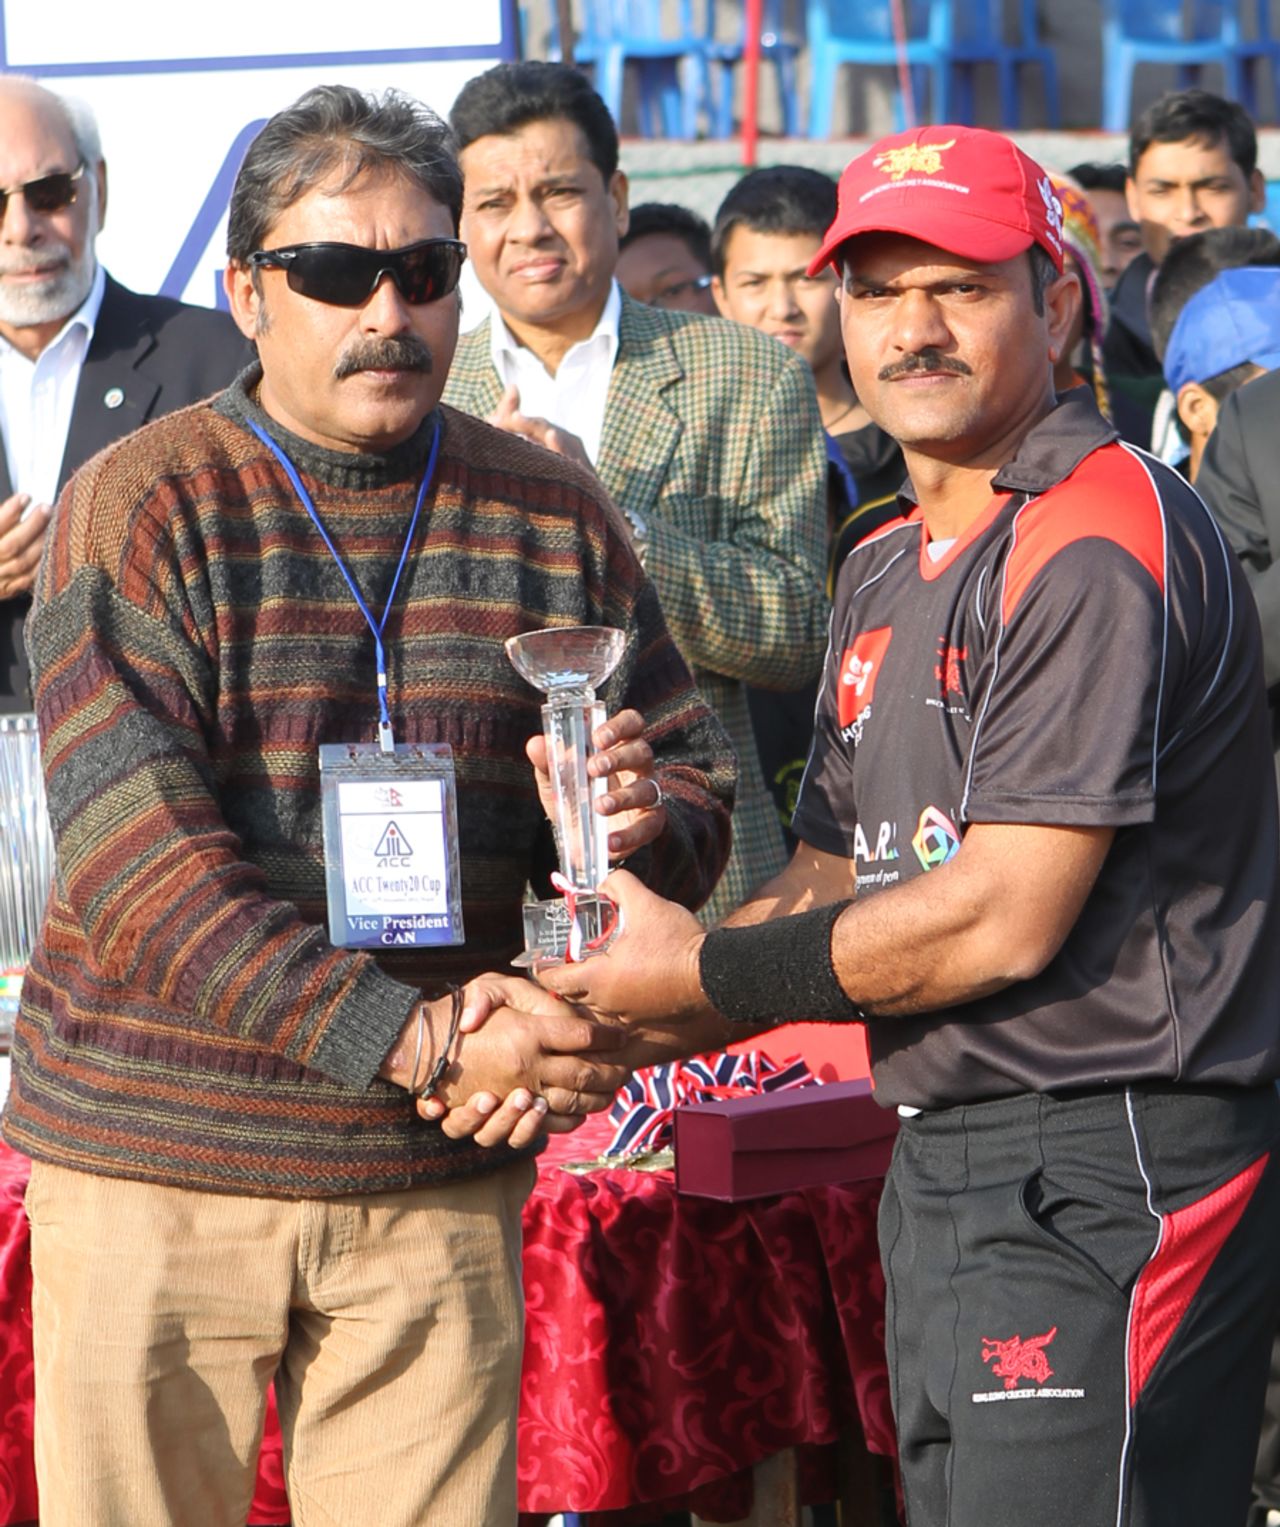 Hong Kong's Moner Ahmed receives the Player of the Series trophy from CAN Vice President Mr Shriniwas Rana at the ACC Twenty20 Cup 2011 in Kathmandu